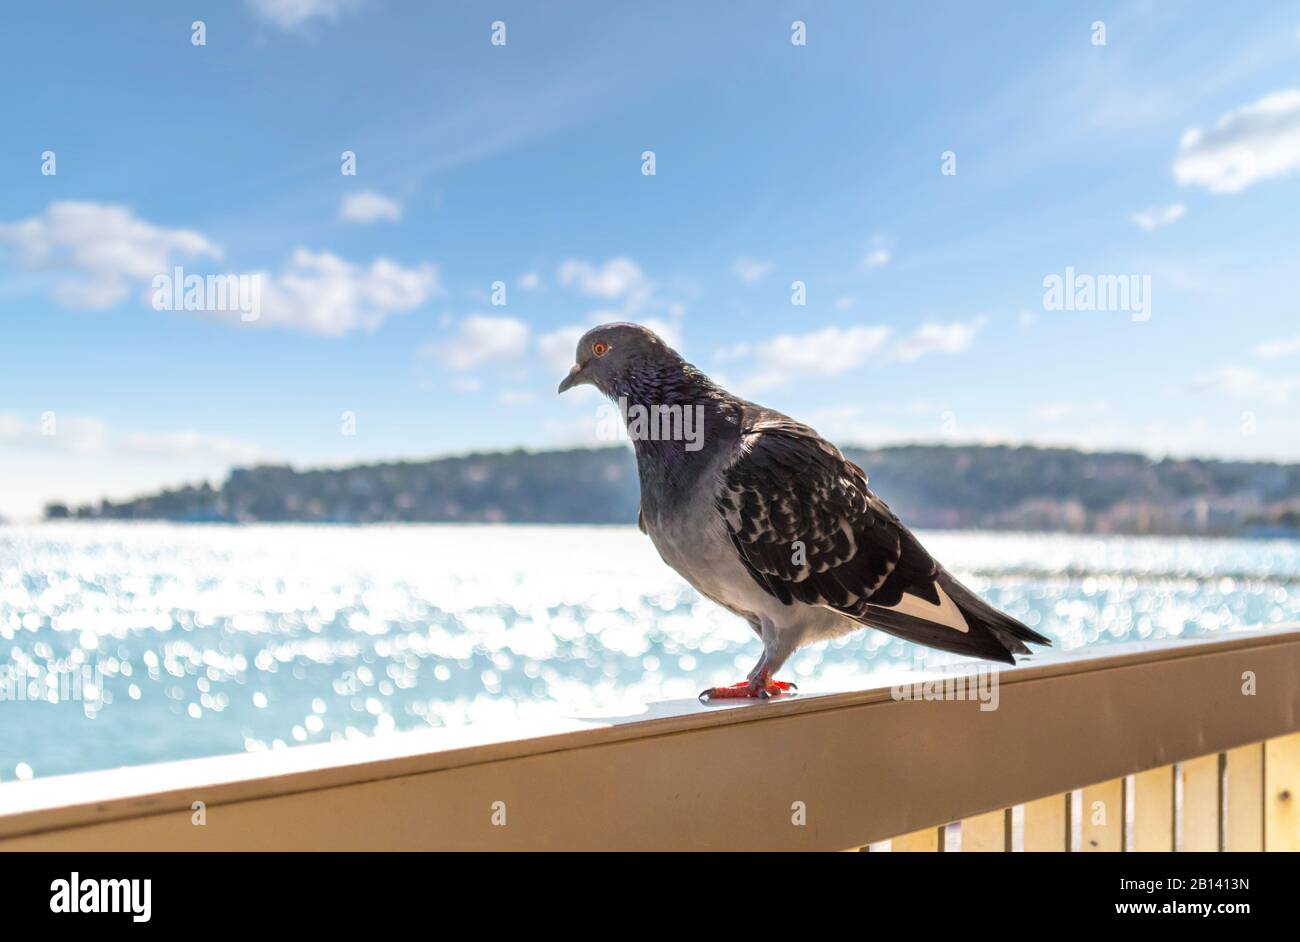 A pigeon stands on a railing overlooking the beach, sea and mountains of Southern France in Menton, France. Stock Photo